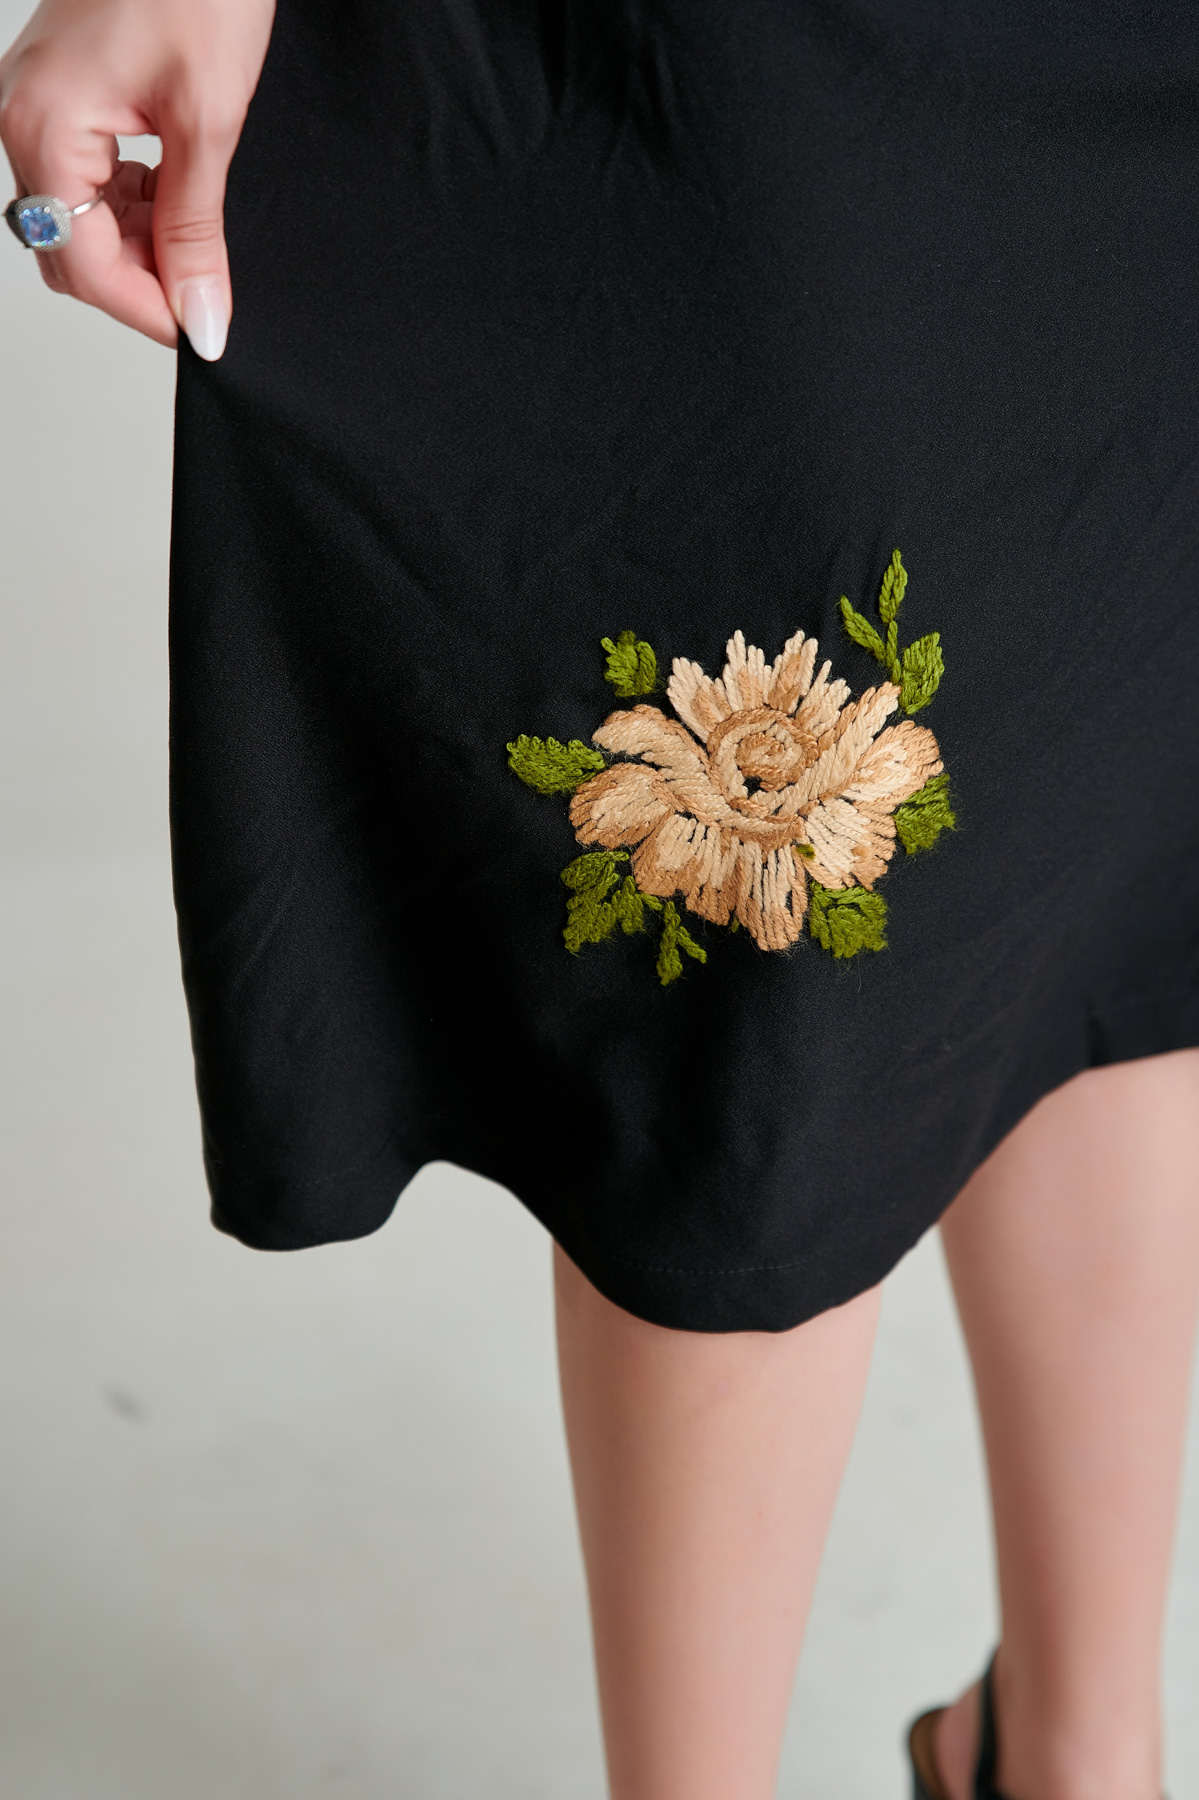 ALEXA casual black dress with lace and floral embroidery. Natural fabrics, original design, handmade embroidery